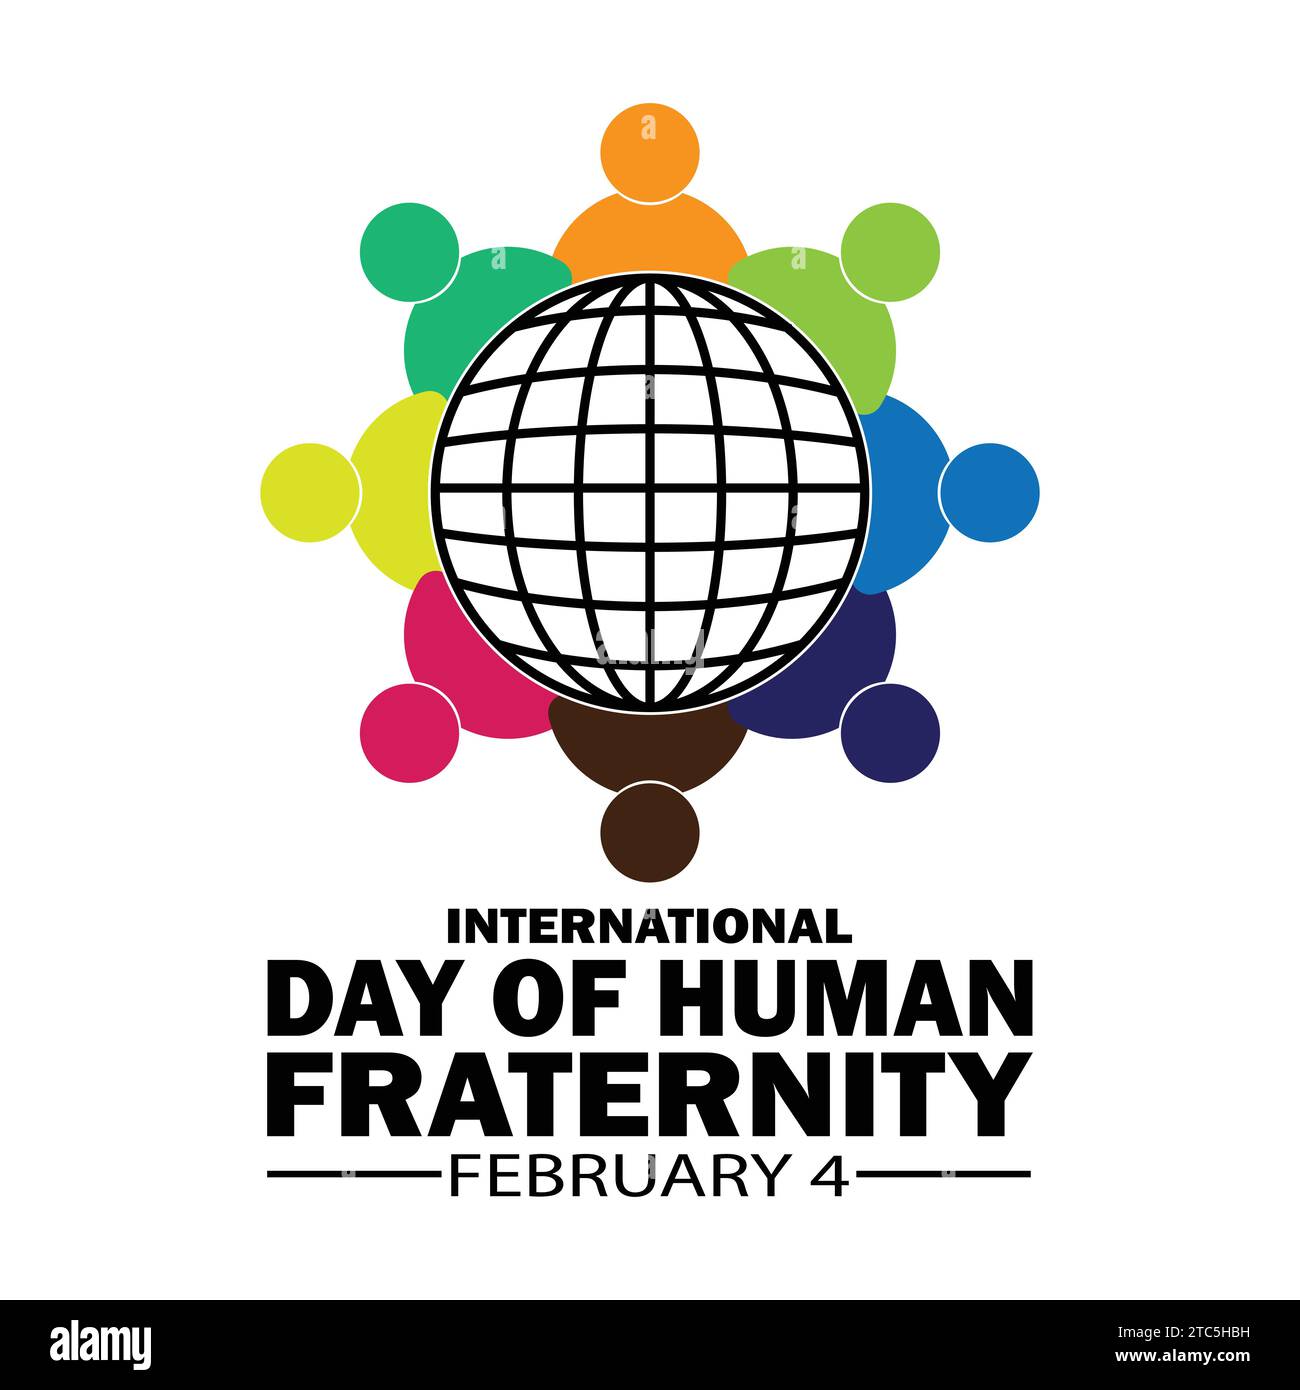 International Day Of Human Fraternity. Vector illustration. February 4. Suitable for greeting card, poster and banner. Stock Vector